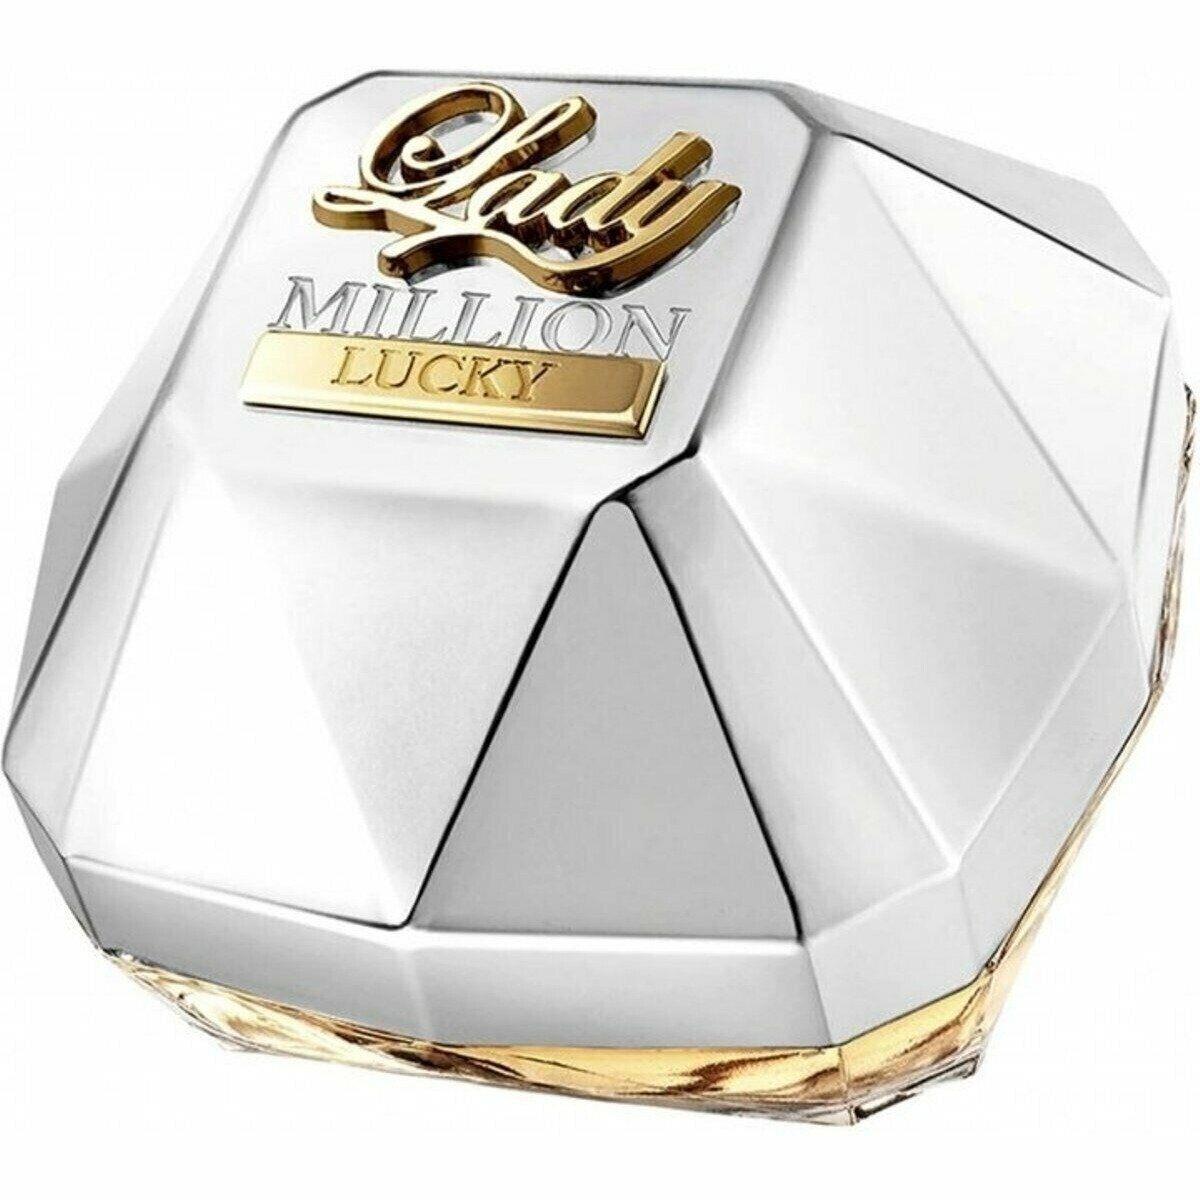 Lady Million Lucky by Paco Rabanne Perfume For Her Edp 2.7 oz Tester